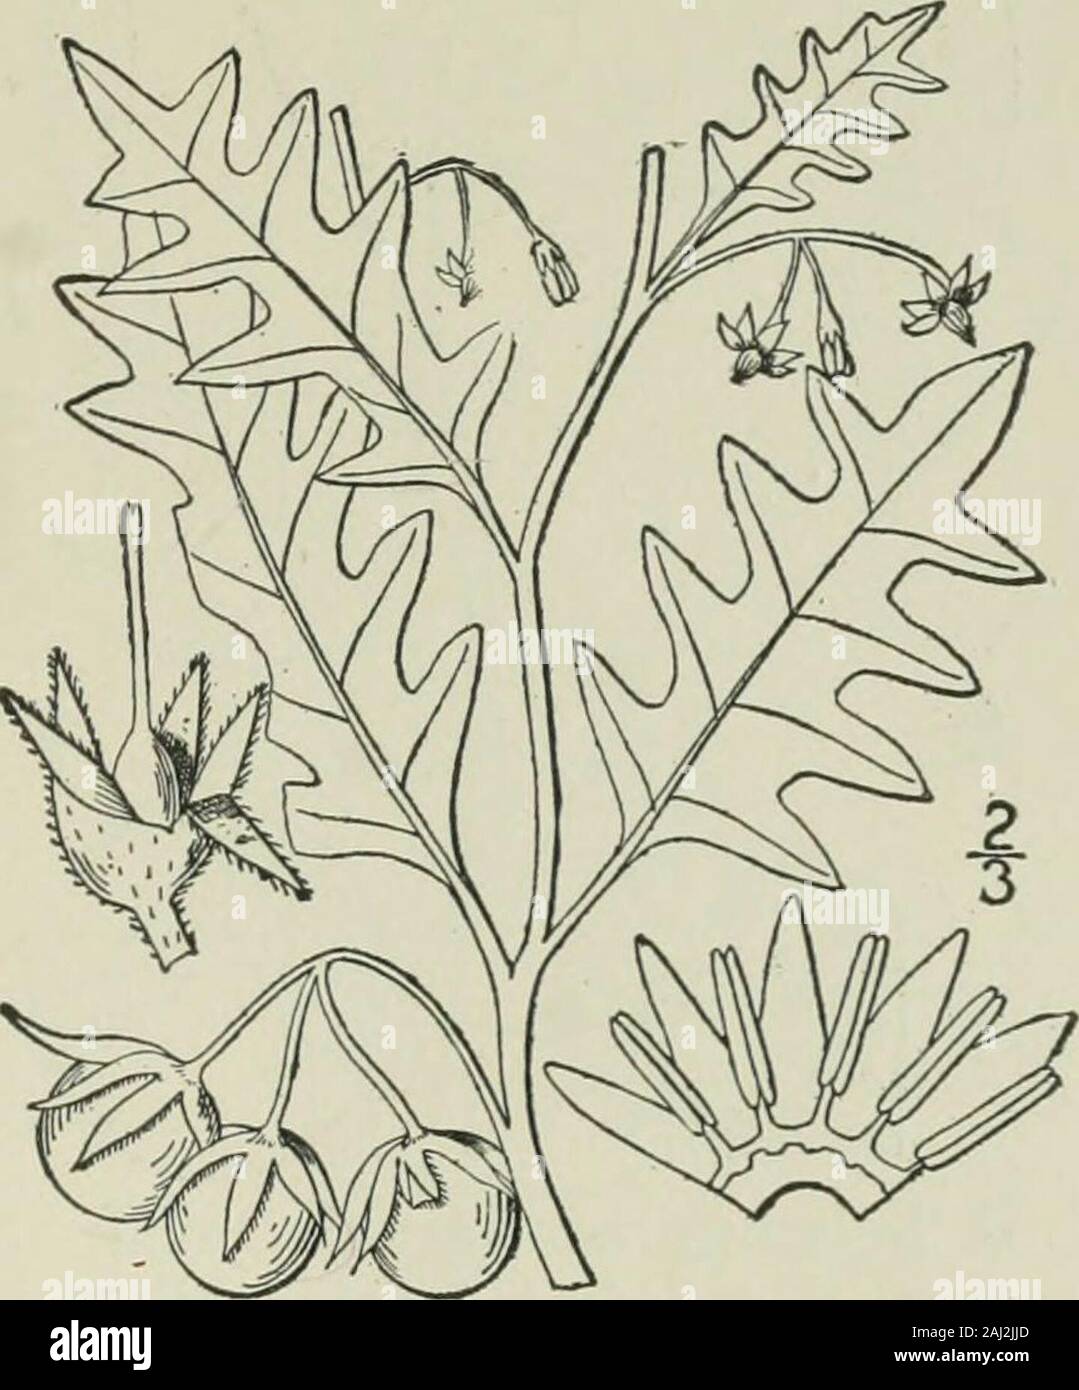 An illustrated flora of the northern United States, Canada and the British possessions : from Newfoundland to the parallel of the southern boundary of Virginia and from the Atlantic Ocean westward to the 102nd meridian . Genus 6. POTATO FAMILY. 165 Solanum villosum (L.) Mill., with coarsely den-tate leaves, the pubescence villous and somewhatviscid, has been found in ballast about the seaports. 2. Solanum triflorum Nutt. Cut-leavedNightshade. Fig. 3718. Solanum triflorum Nutt. Gen. i : 128. 1818. Annual, sparingly pubescent with simple hairs,or glabrous; stem branched, i°-3° high. Leavespinnat Stock Photo